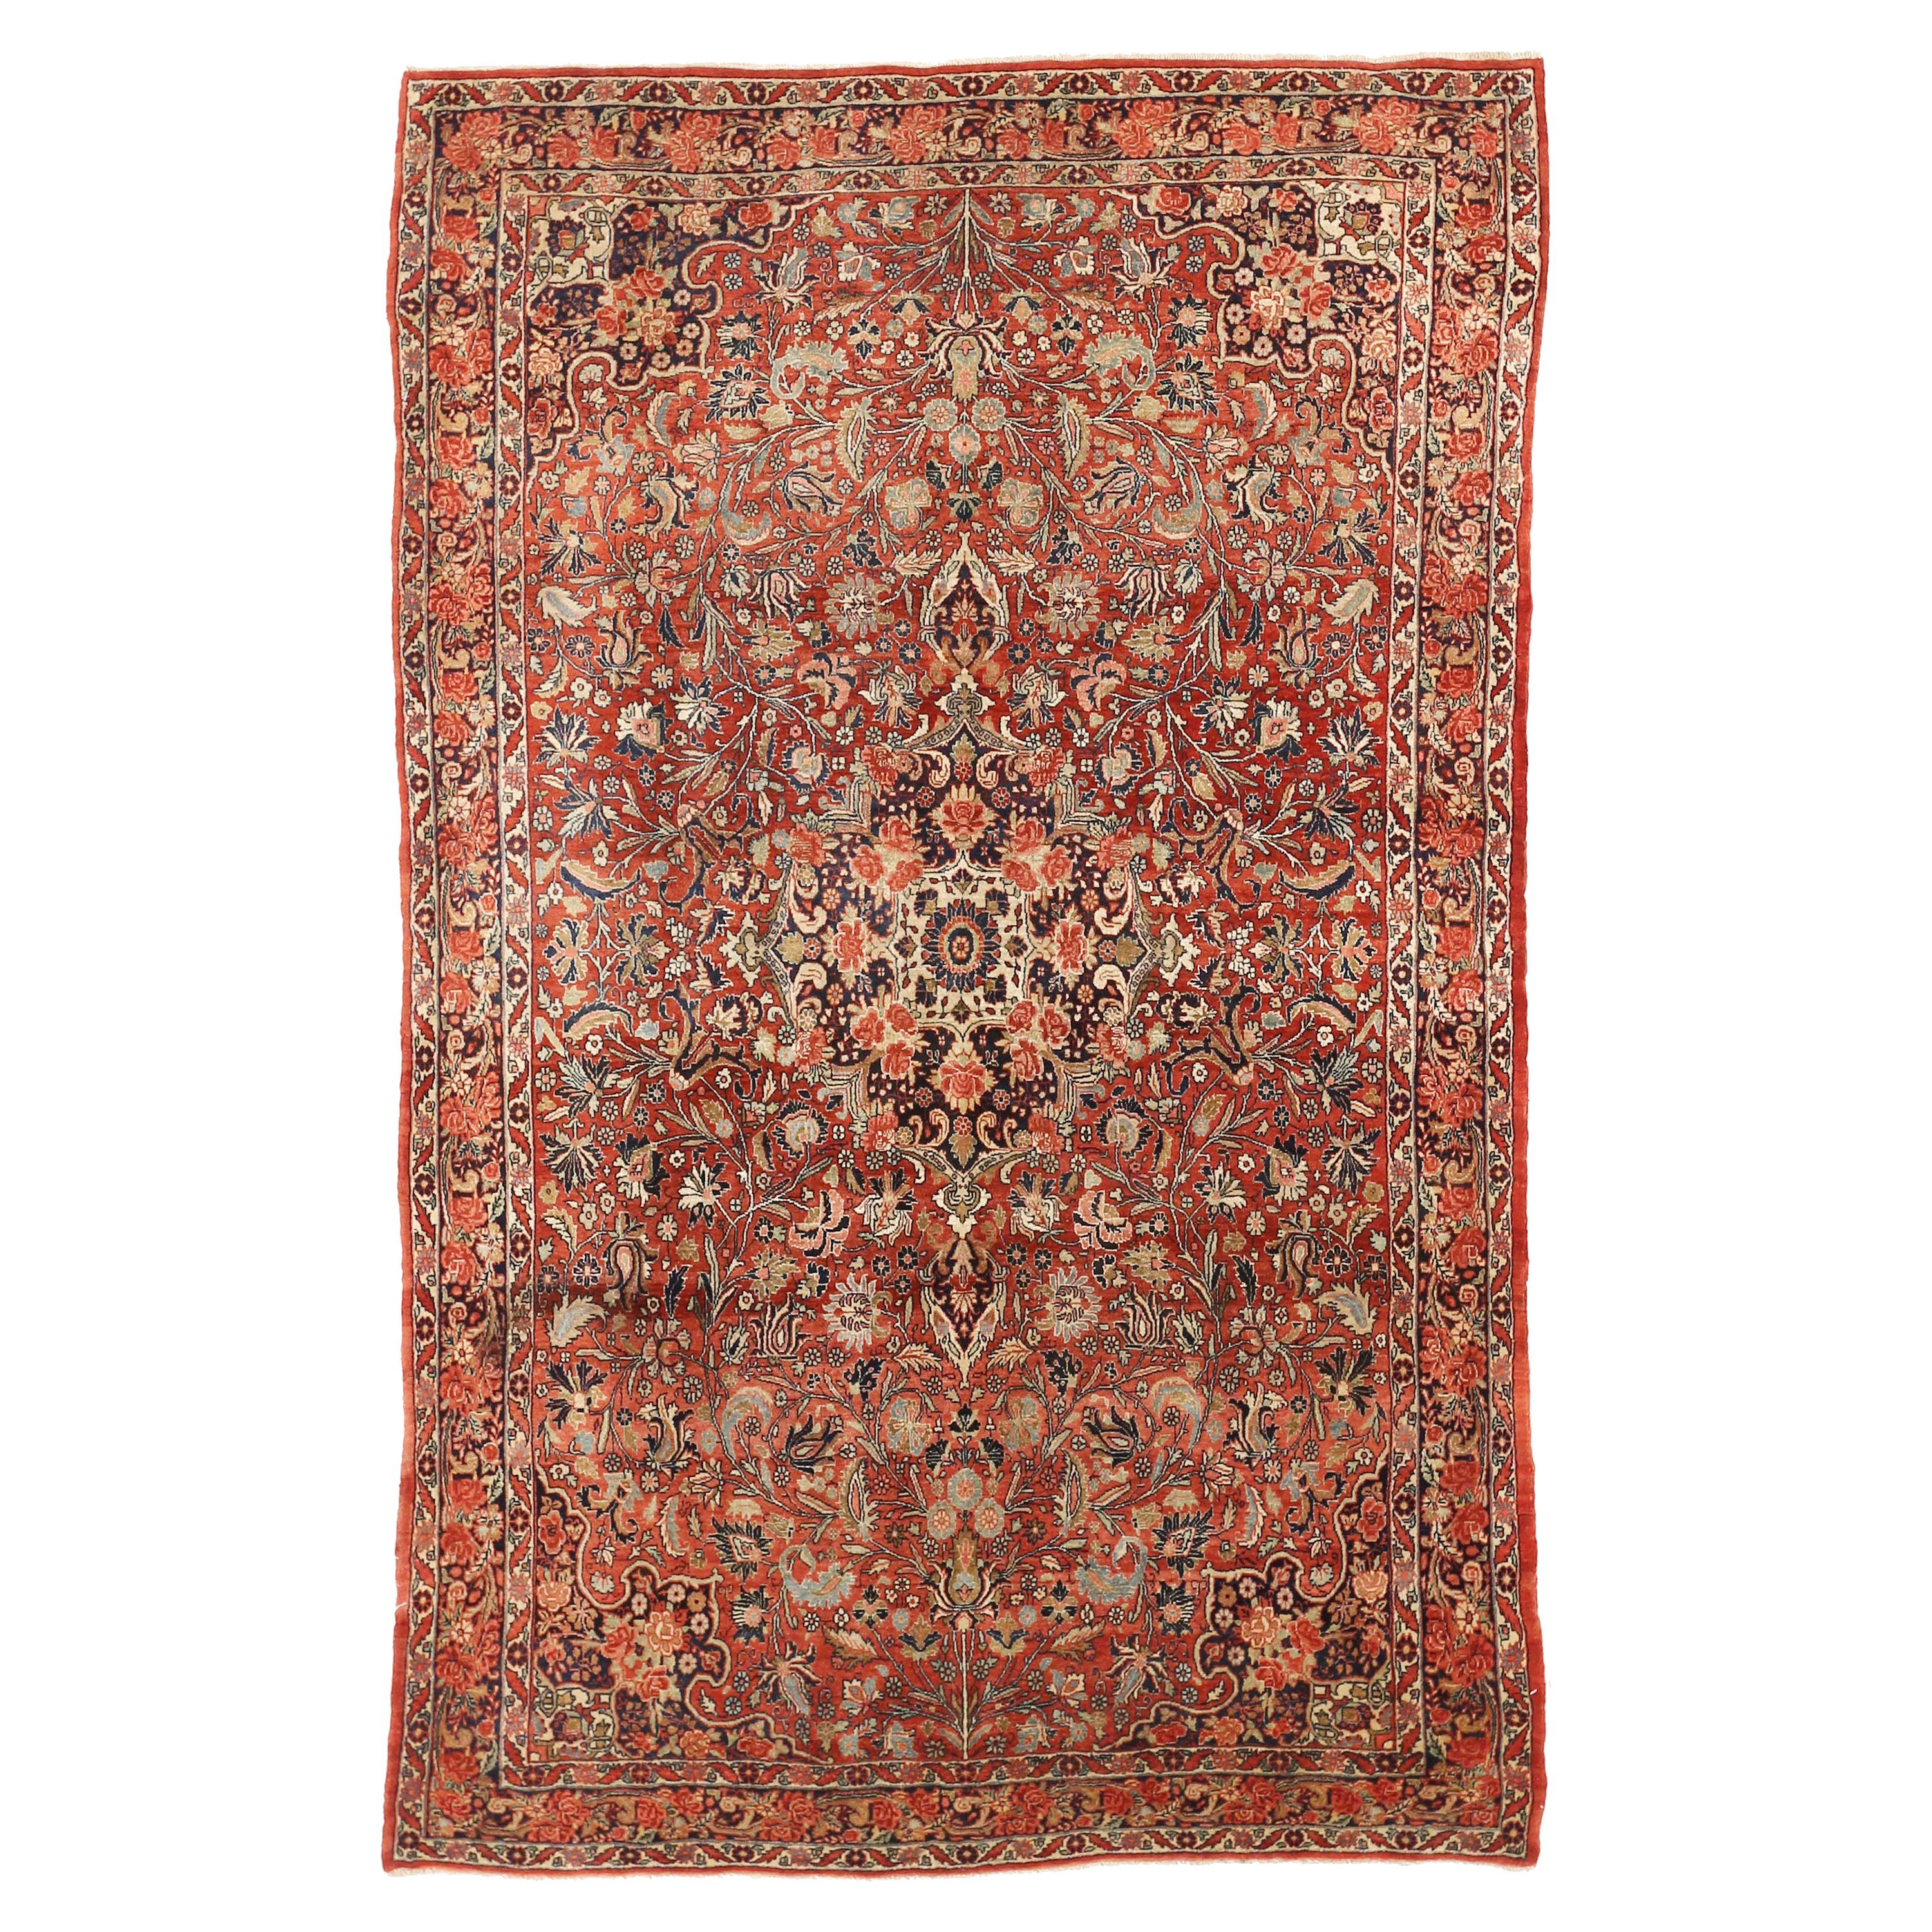 Antique Persian Bijar Rug with Ivory and Black Floral Details on Red Field